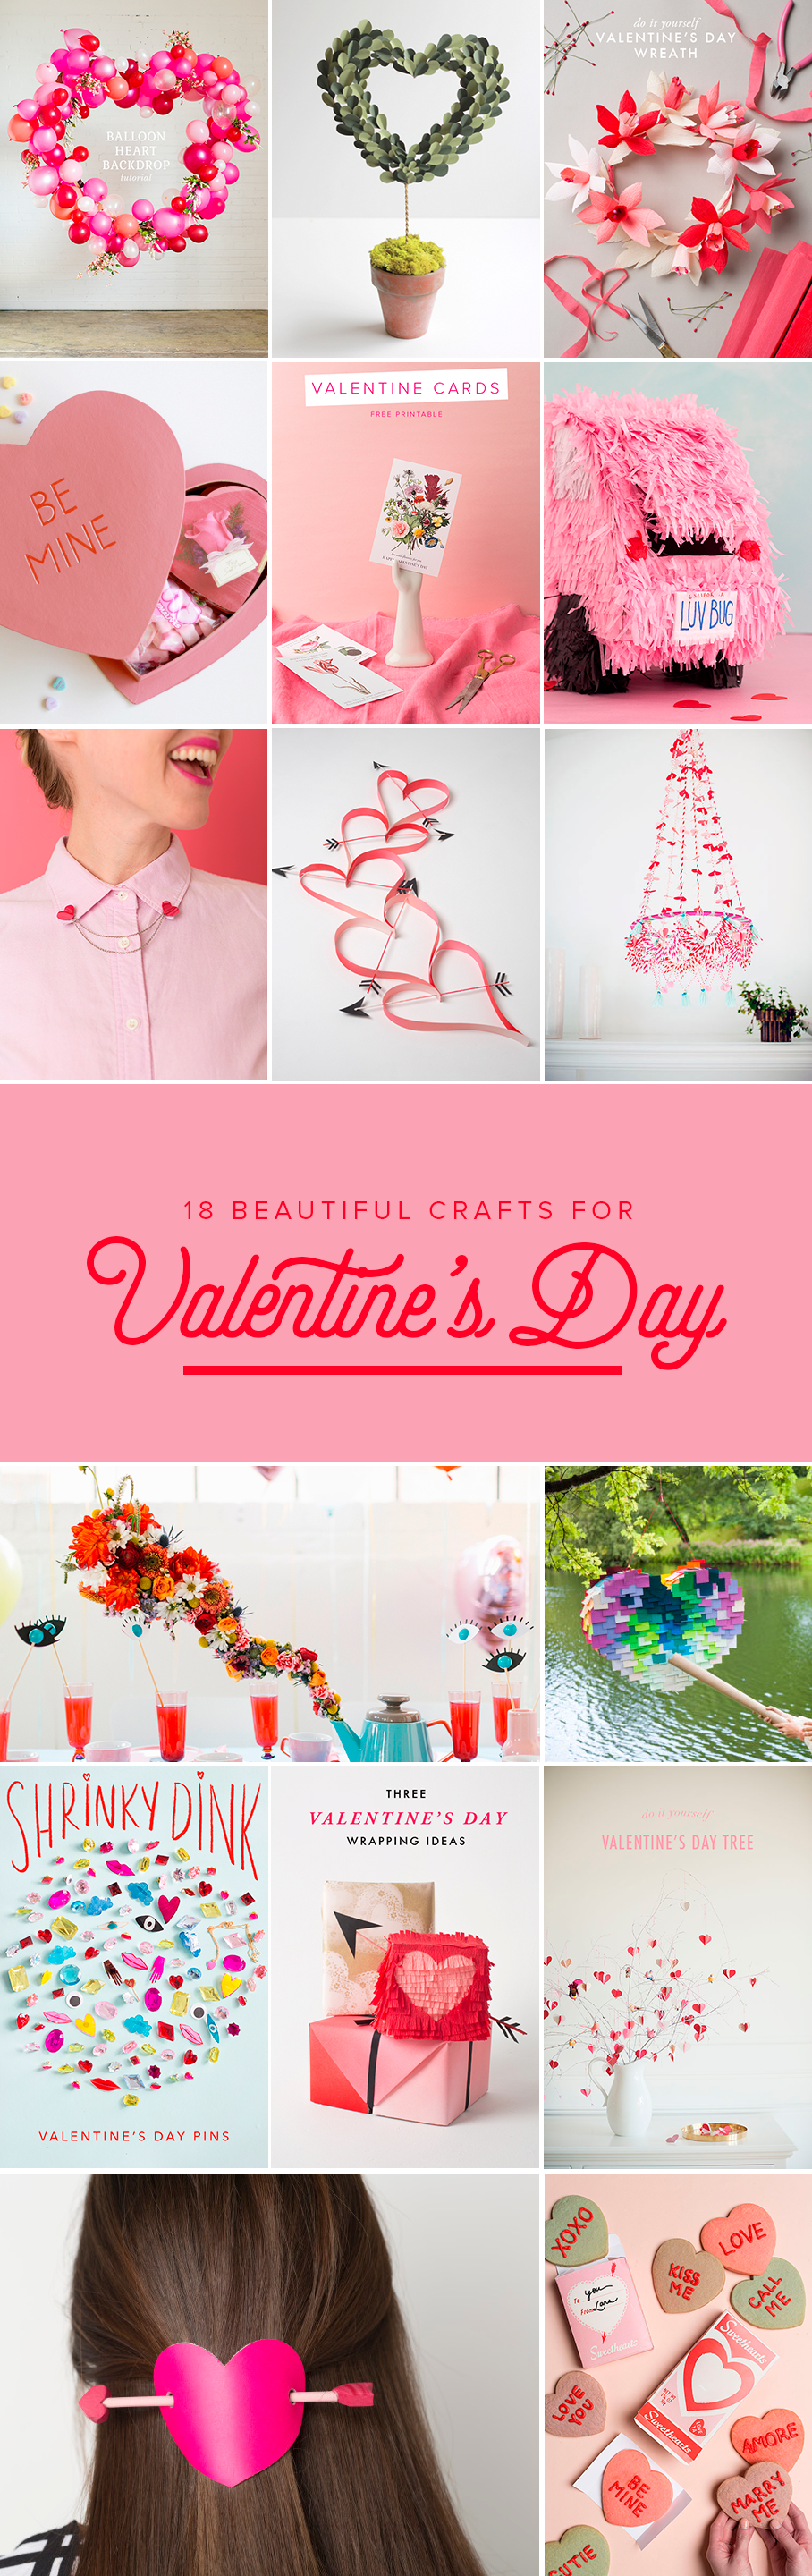 Valentine's Day craft projects